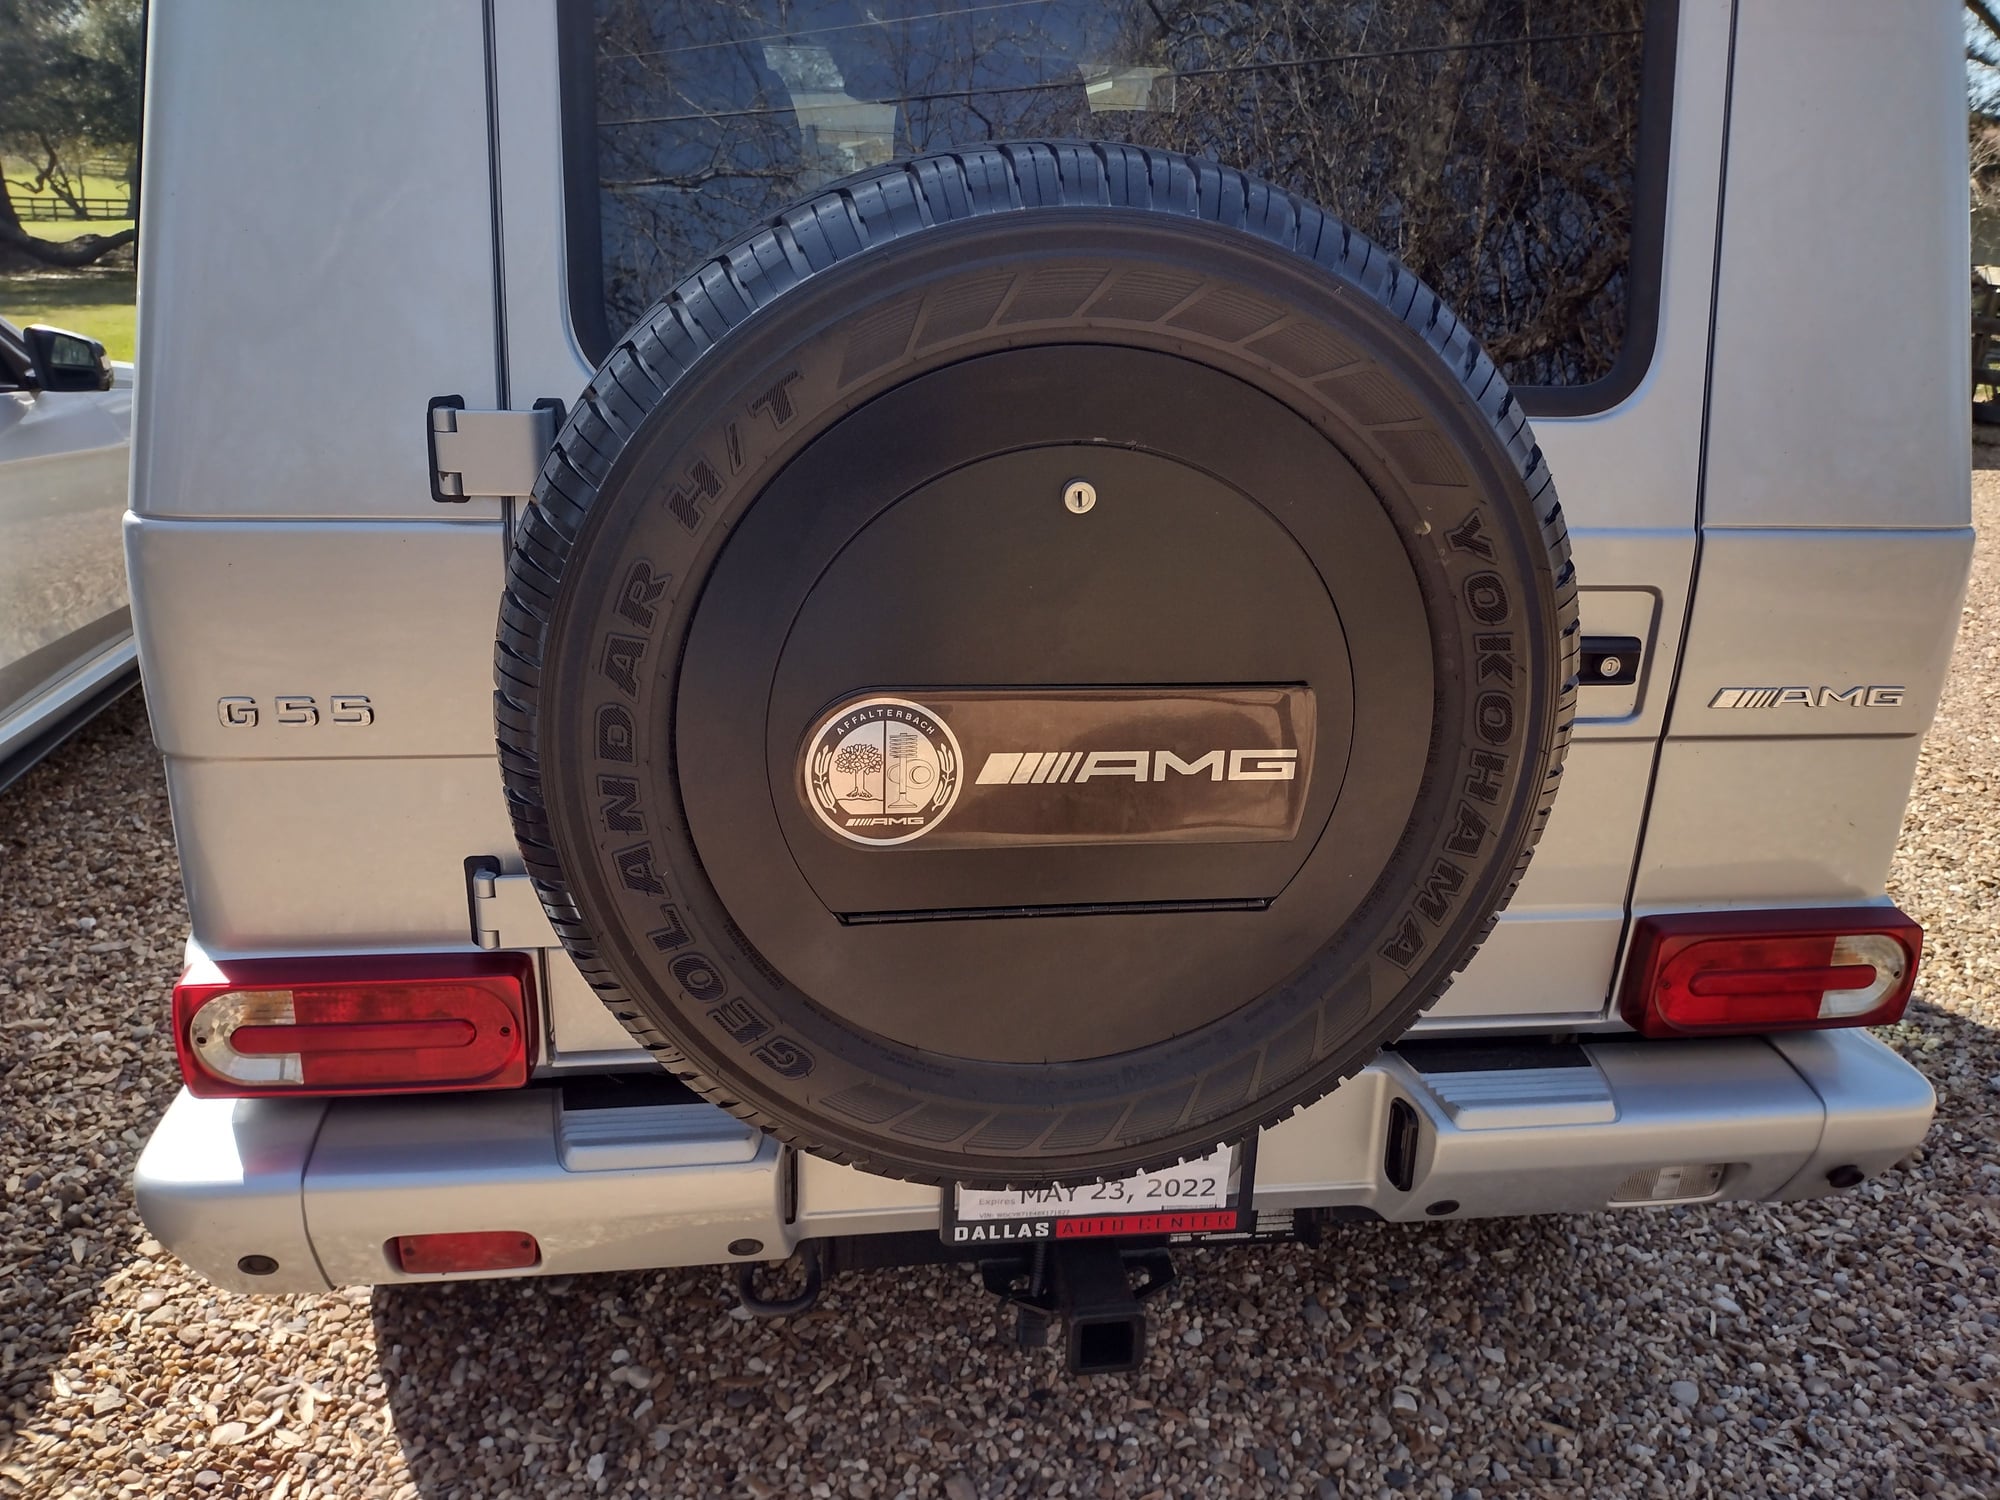 Exterior Body Parts - G Wagon aftermarket Rear spare tire Carrier storage setup - Used - 1990 to 2018 Mercedes-Benz G-Class - Houston, TX 77406, United States